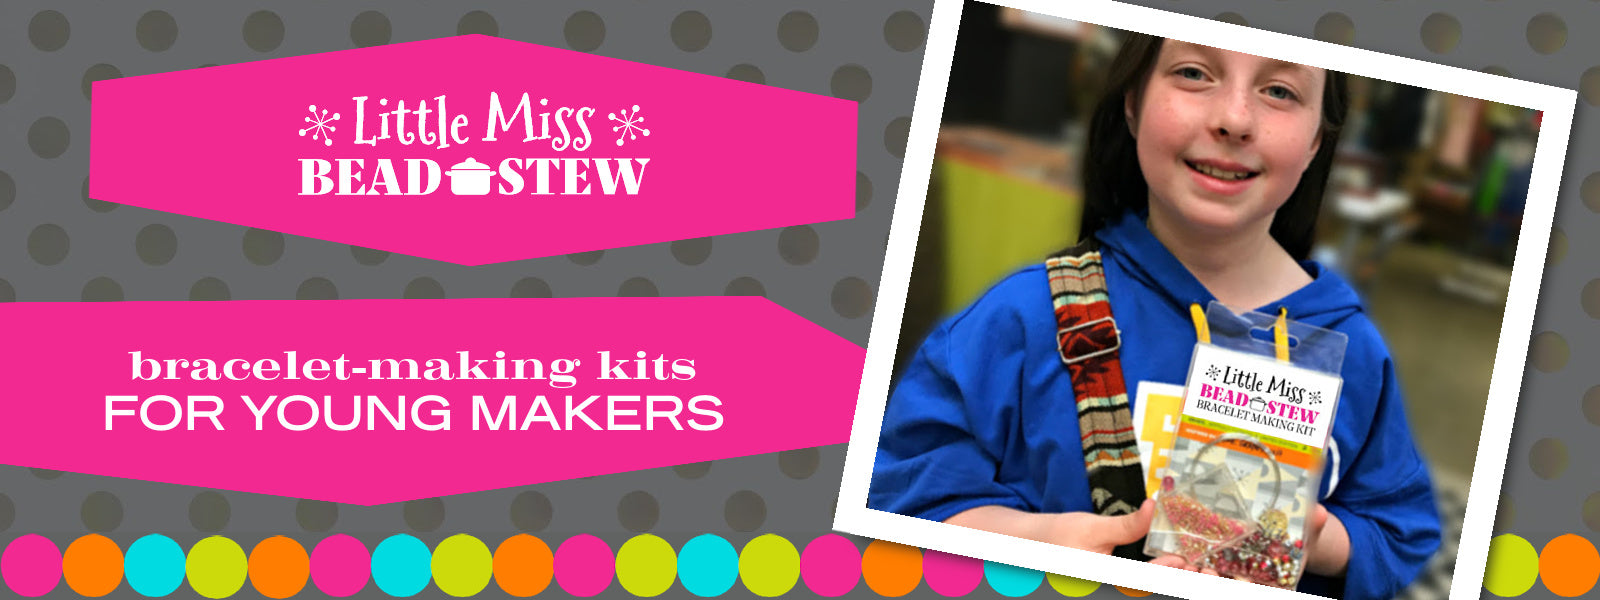 Our BEAD STEW kid's jewelry making kits are perfect for "Little Miss" jewelry makers. The bead and color combinations ensure it’s easy to create the bangle-style bracelet.